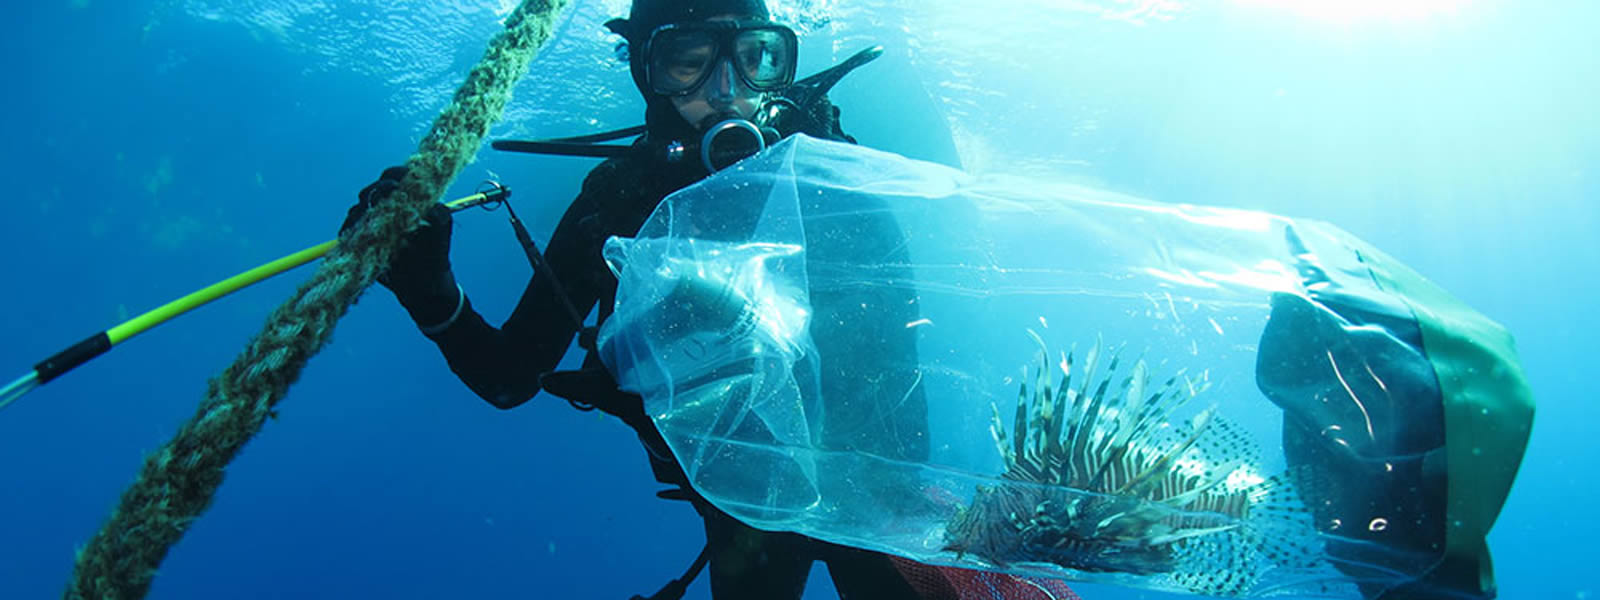 A scuba diver is underwater holding onto a rope and a clear bag containing a lionfish